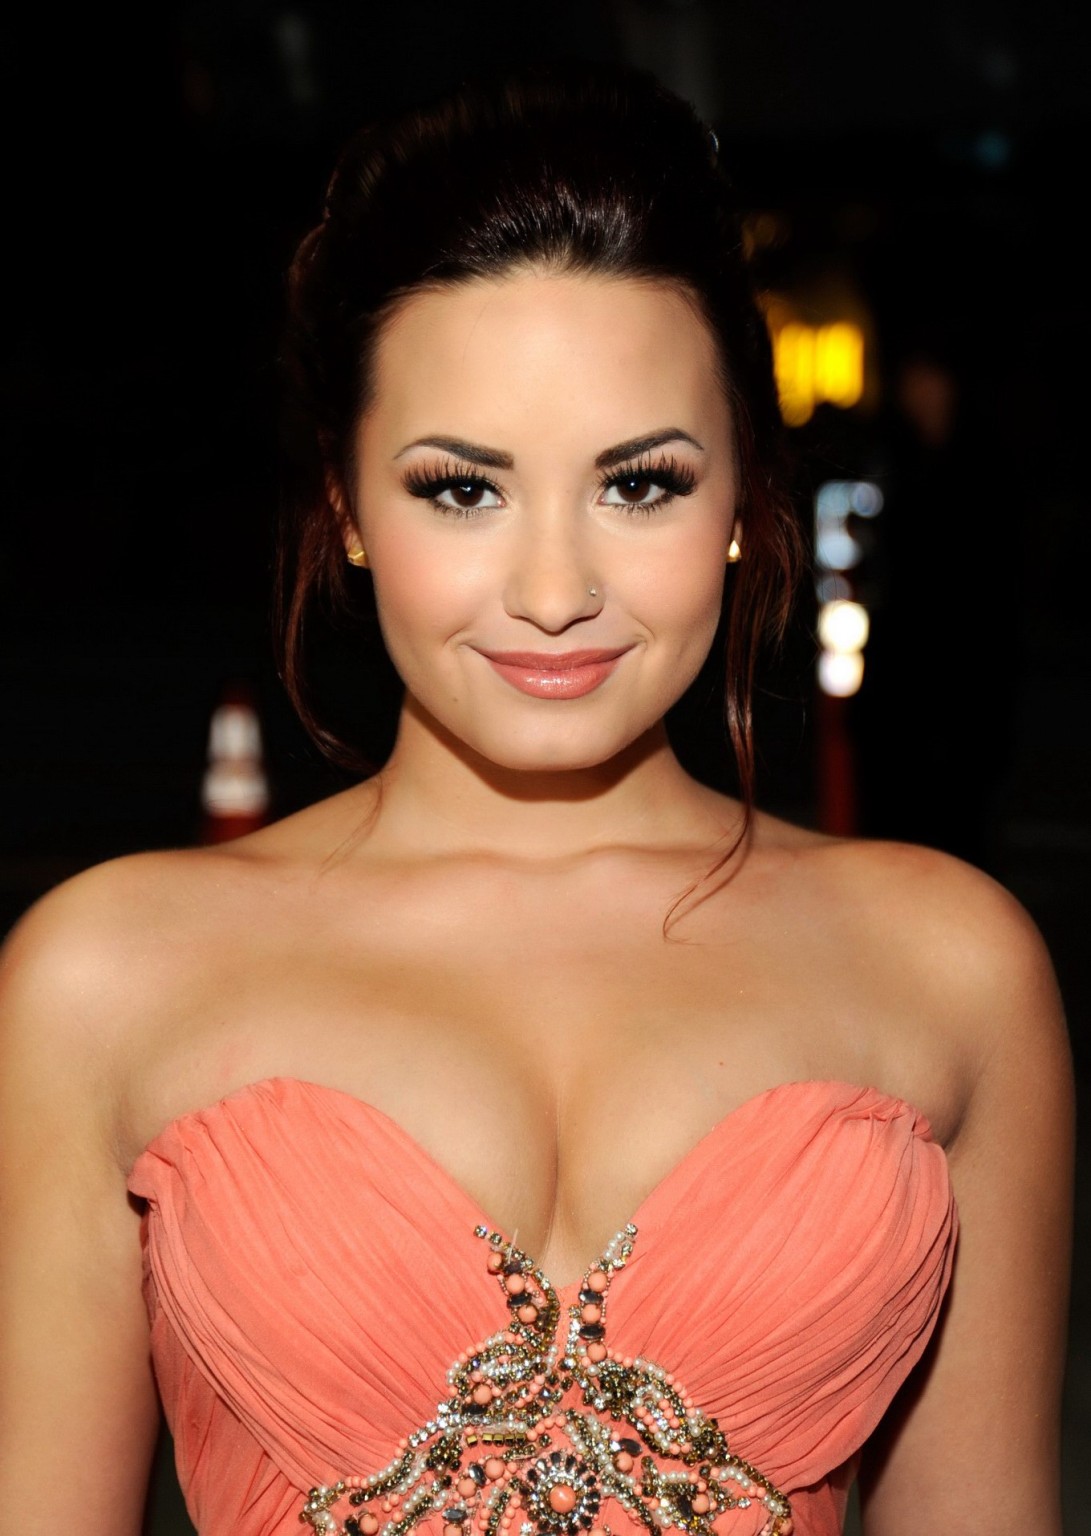 Demi Lovato shows cleavage wearing strapless dress at 2012 People's Choice Award #75276458